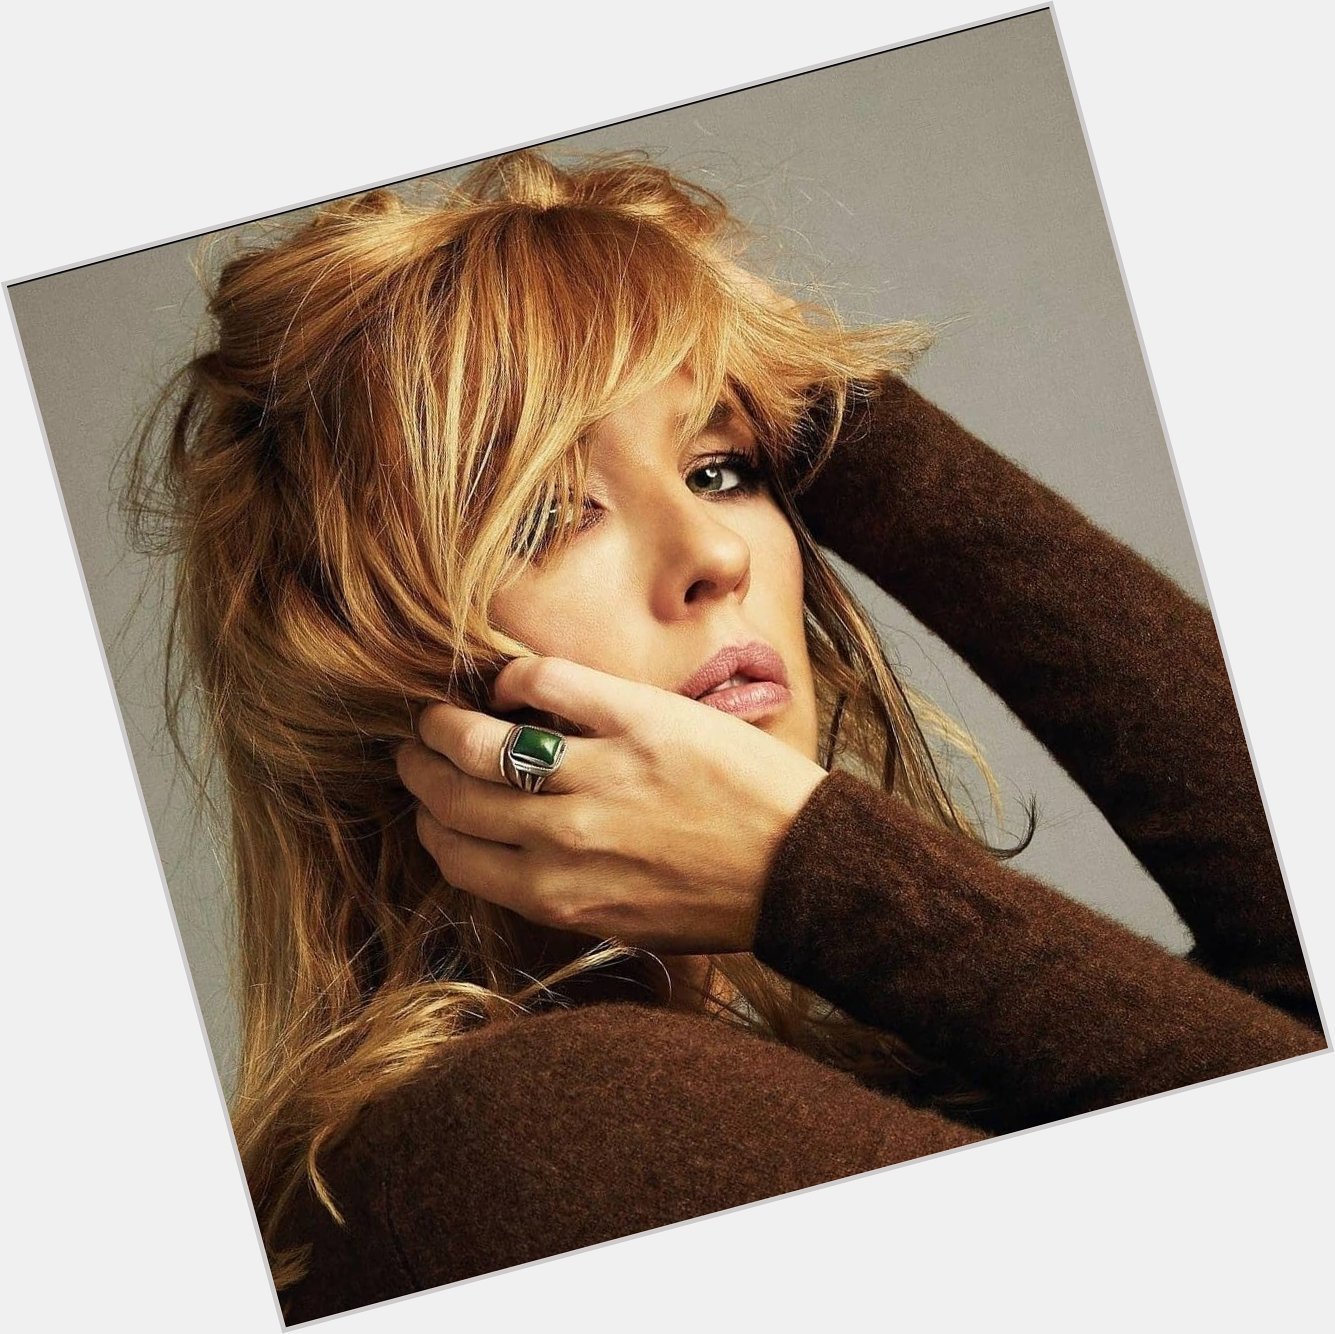 Happy Birthday Kelly Reilly! You are the baddest of badasses   